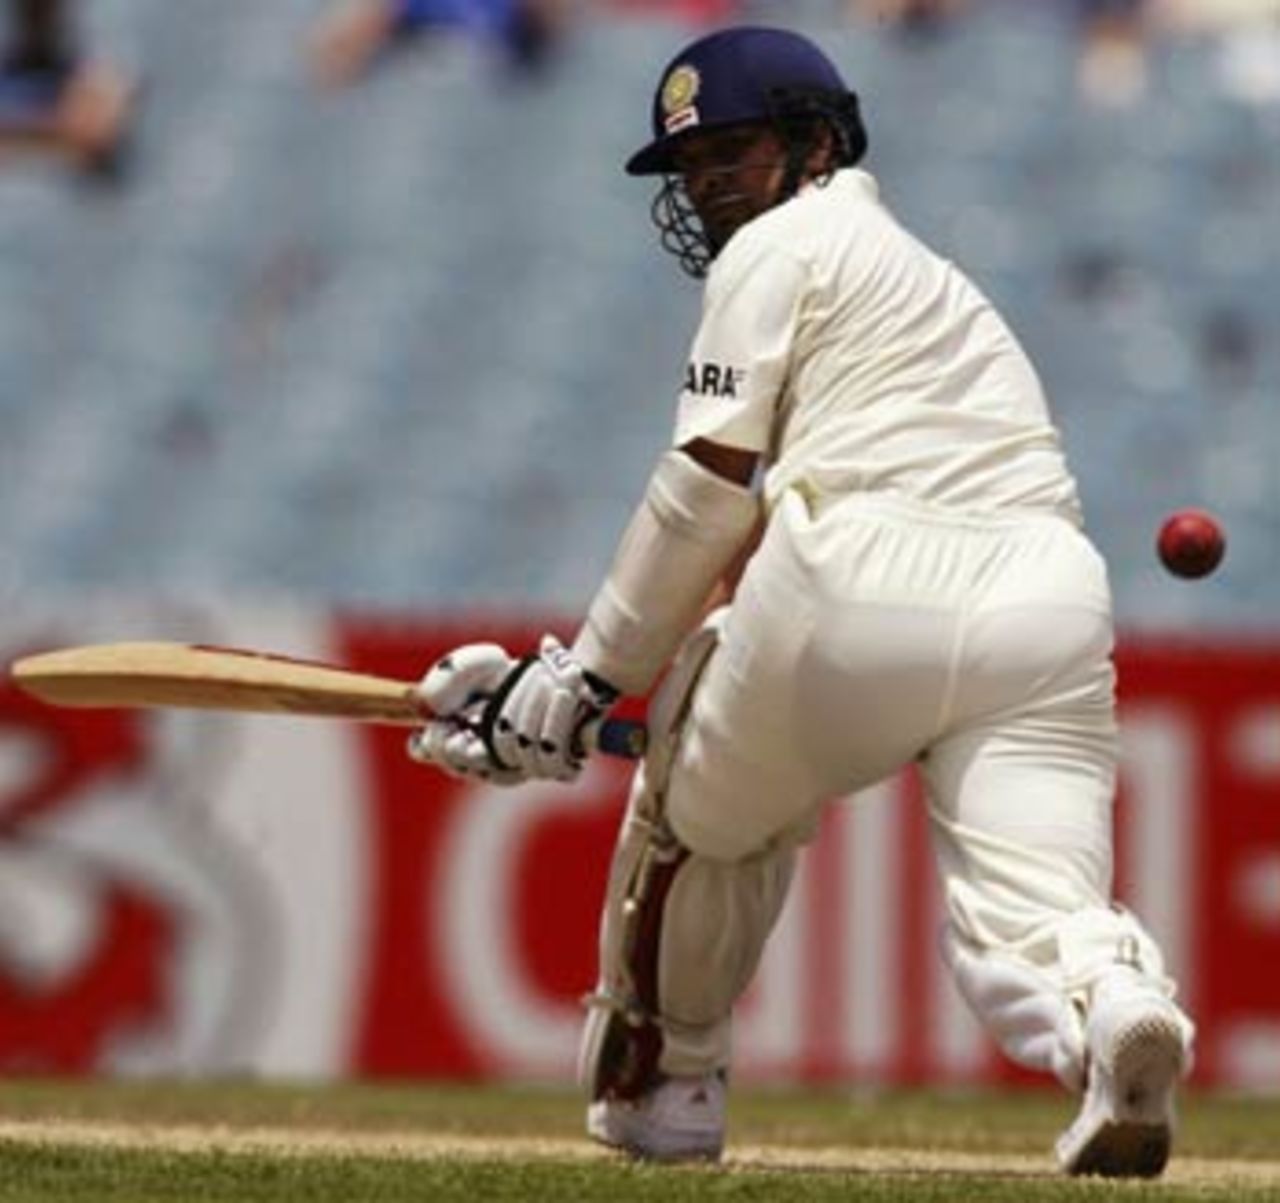 Sachin Tendulkar finally came out and played a few shots, Australia v India, 3rd Test, Melbourne, 4th day, December 29, 2003